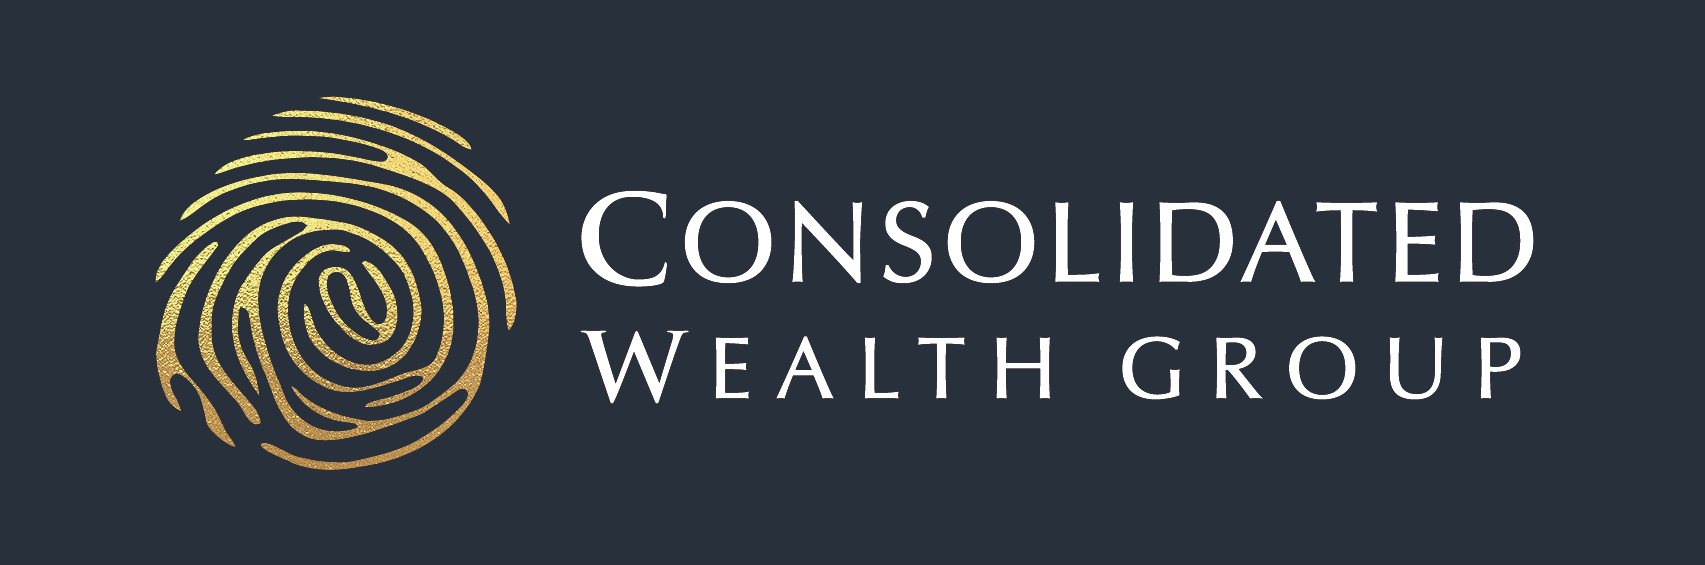 Consolidated Wealth